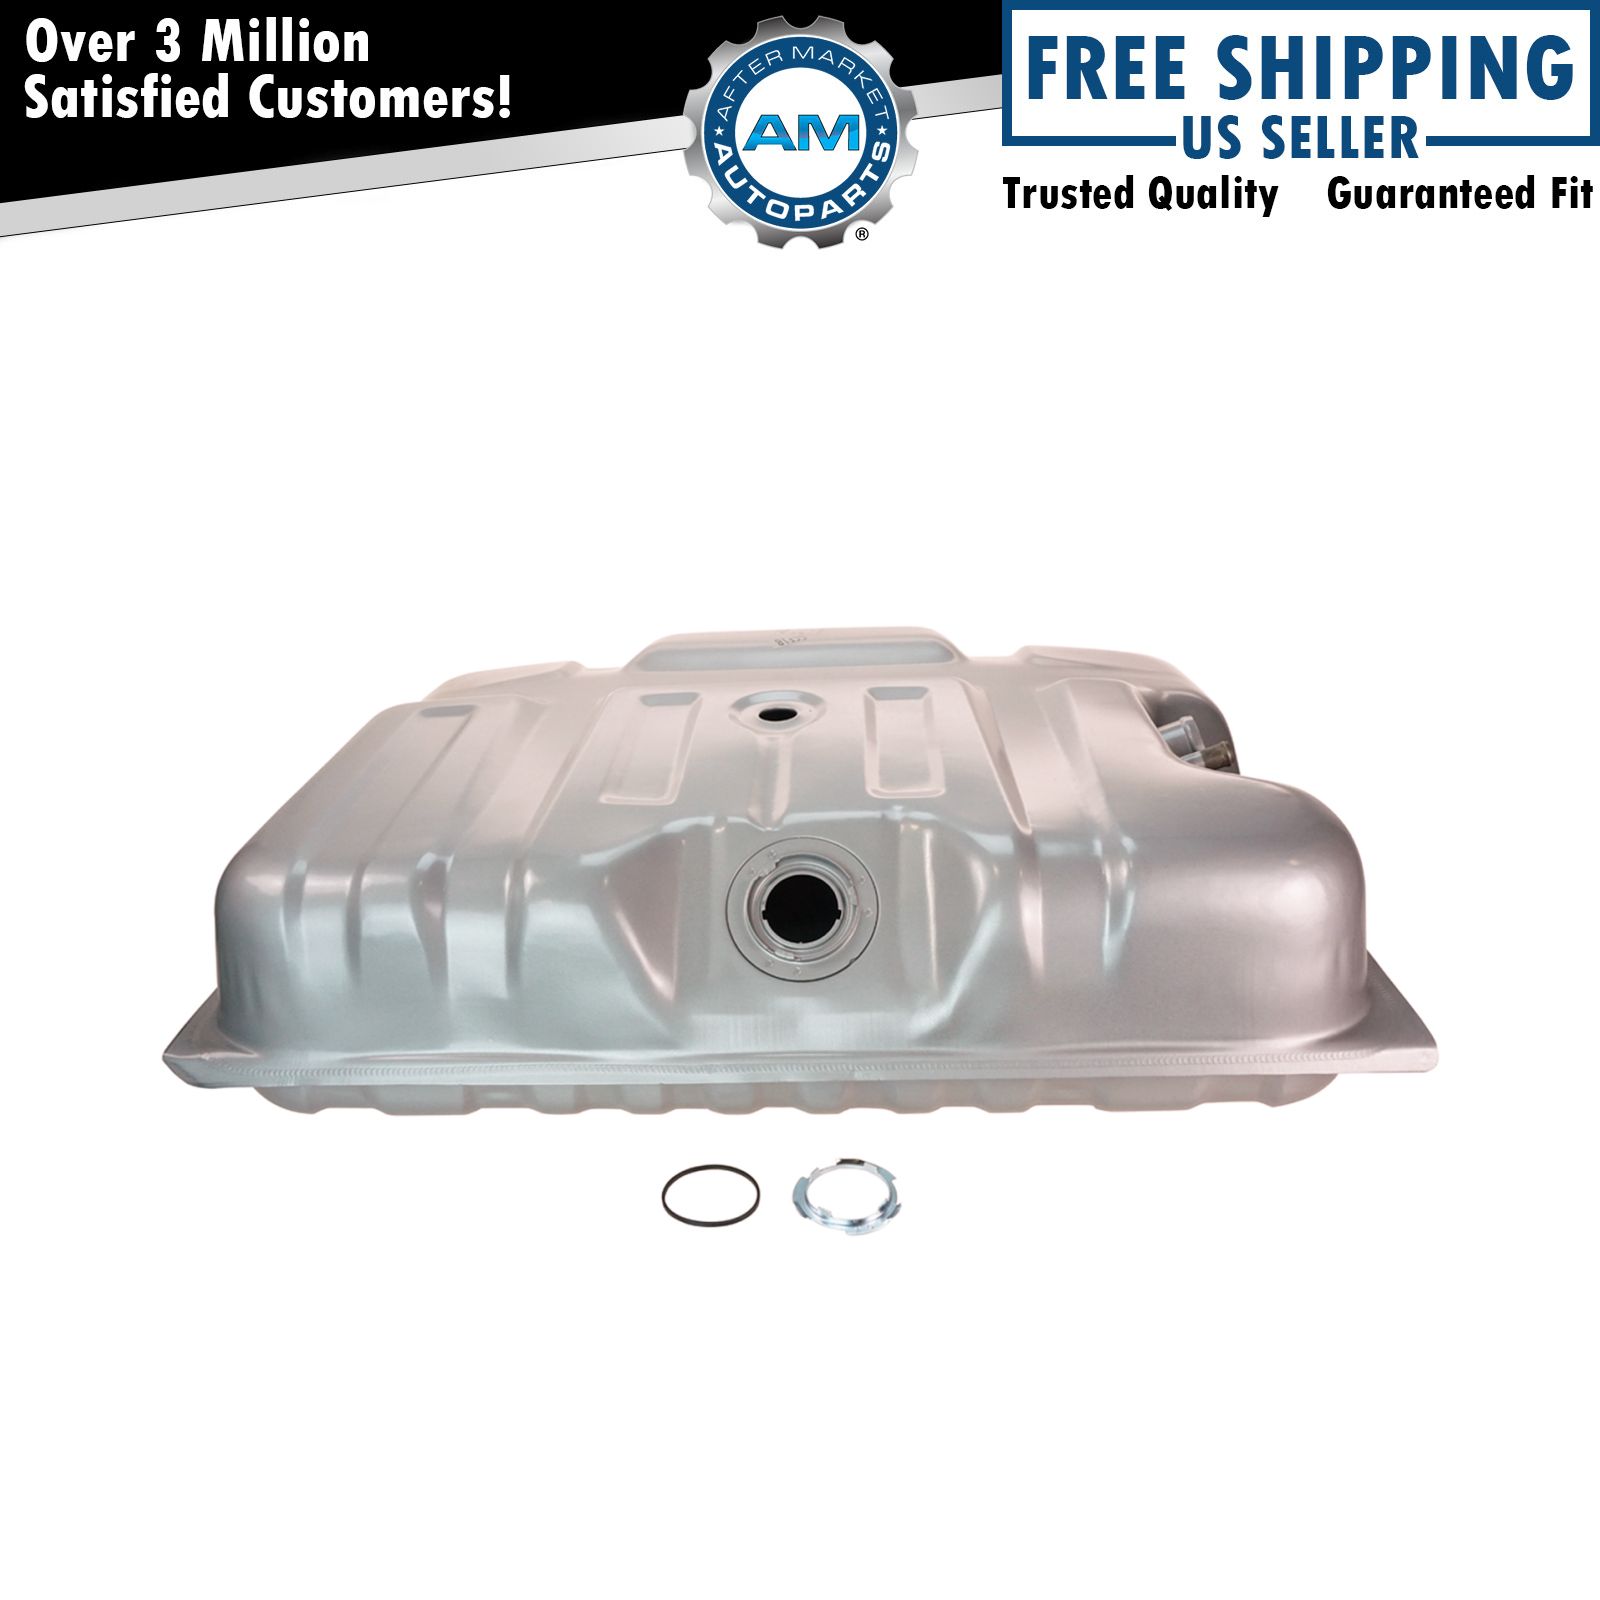 Fuel Gas Tank 19 Gallon NEW for Ford F-Series Pickup Truck w/ EEC